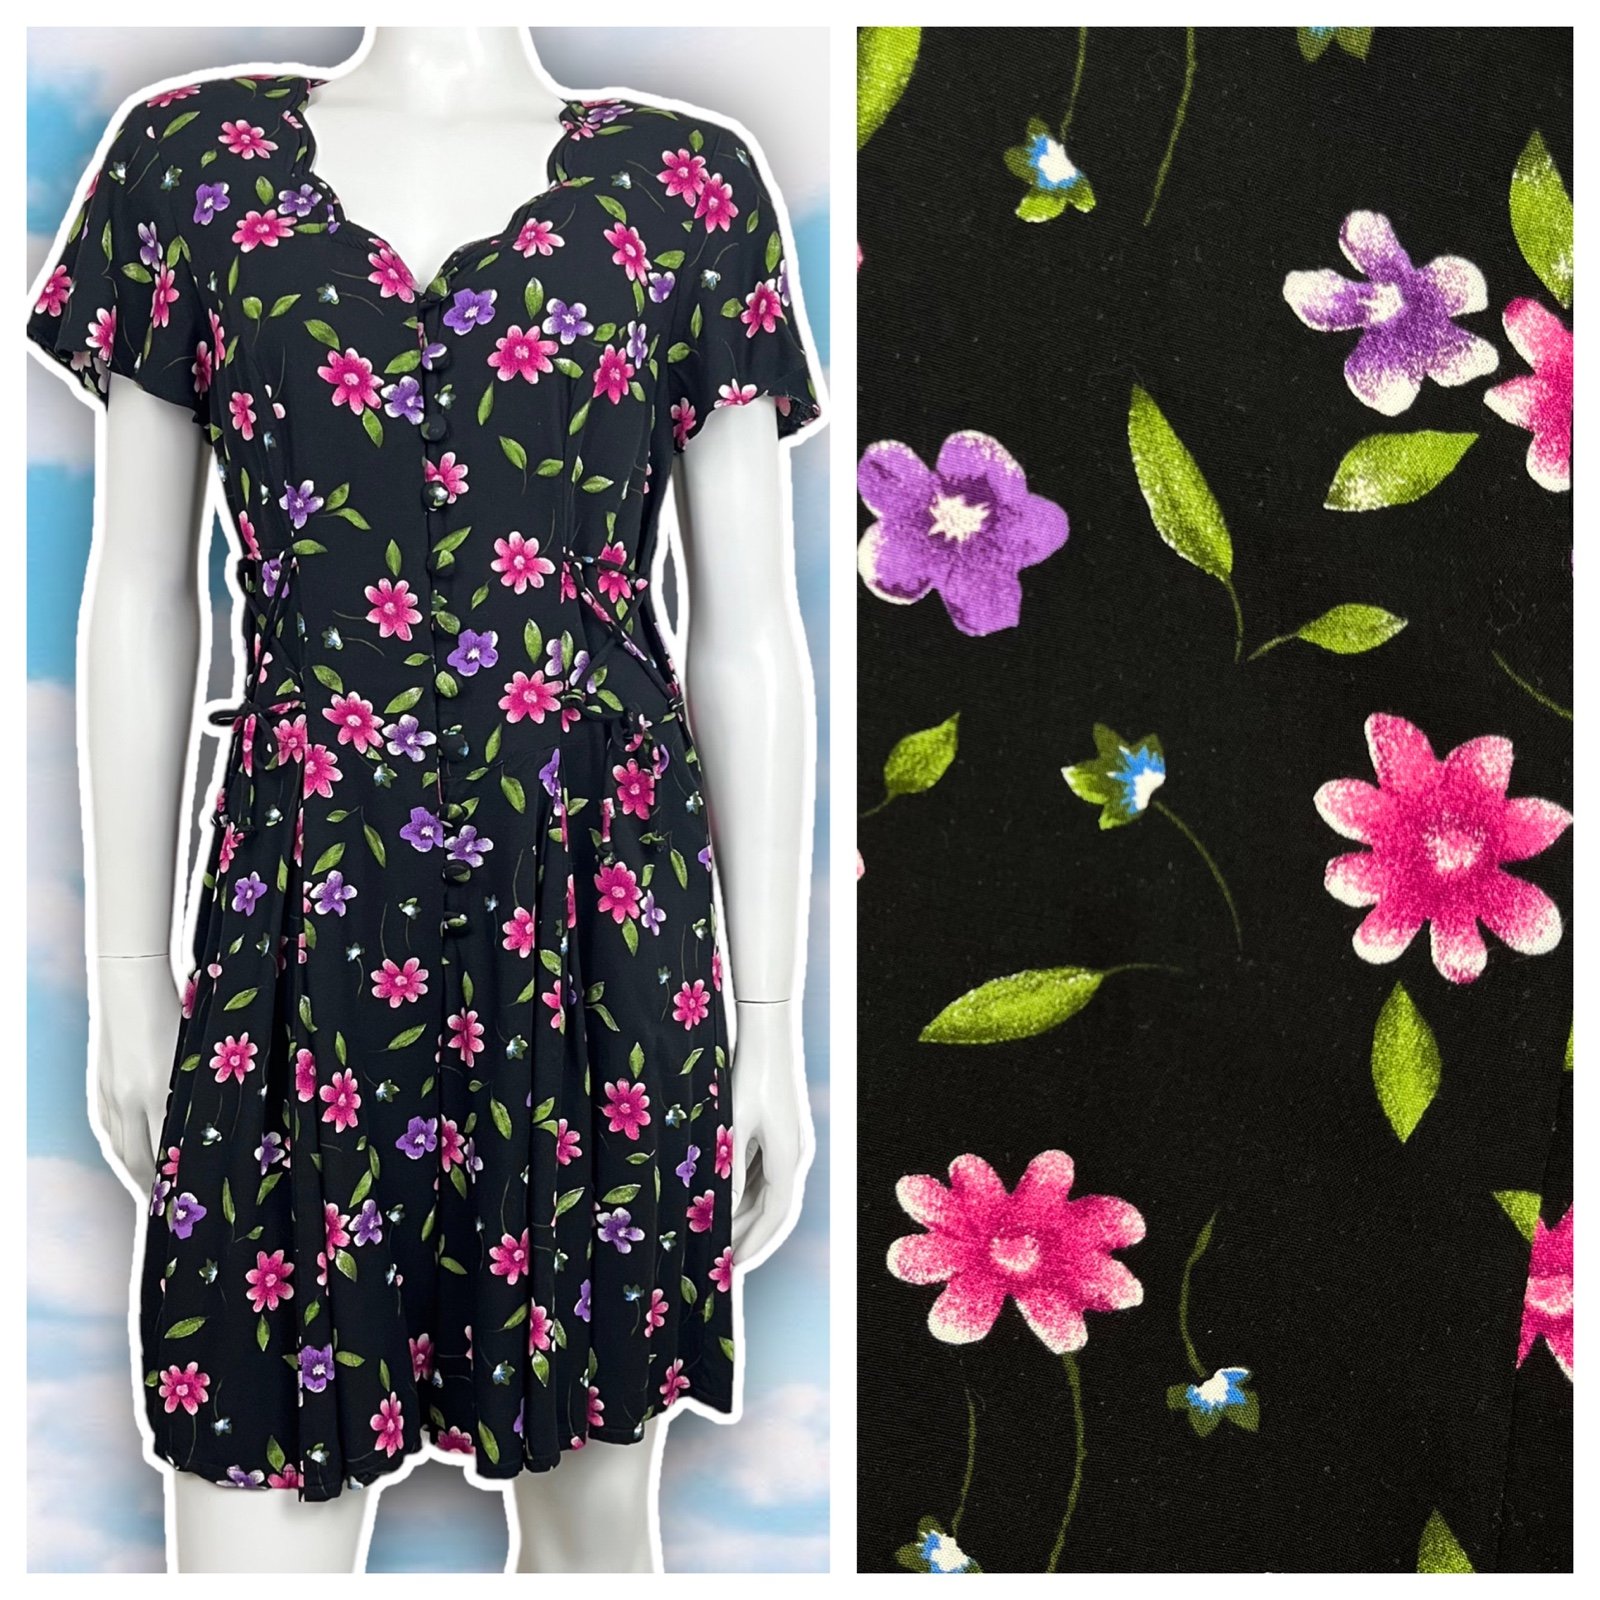 Wholesale price BASIC EDITIONS Vintage Floral Skort Romper Cottagecore Kidcore Prairie 90s Y2K PG8Oq36qe Buying Cheap